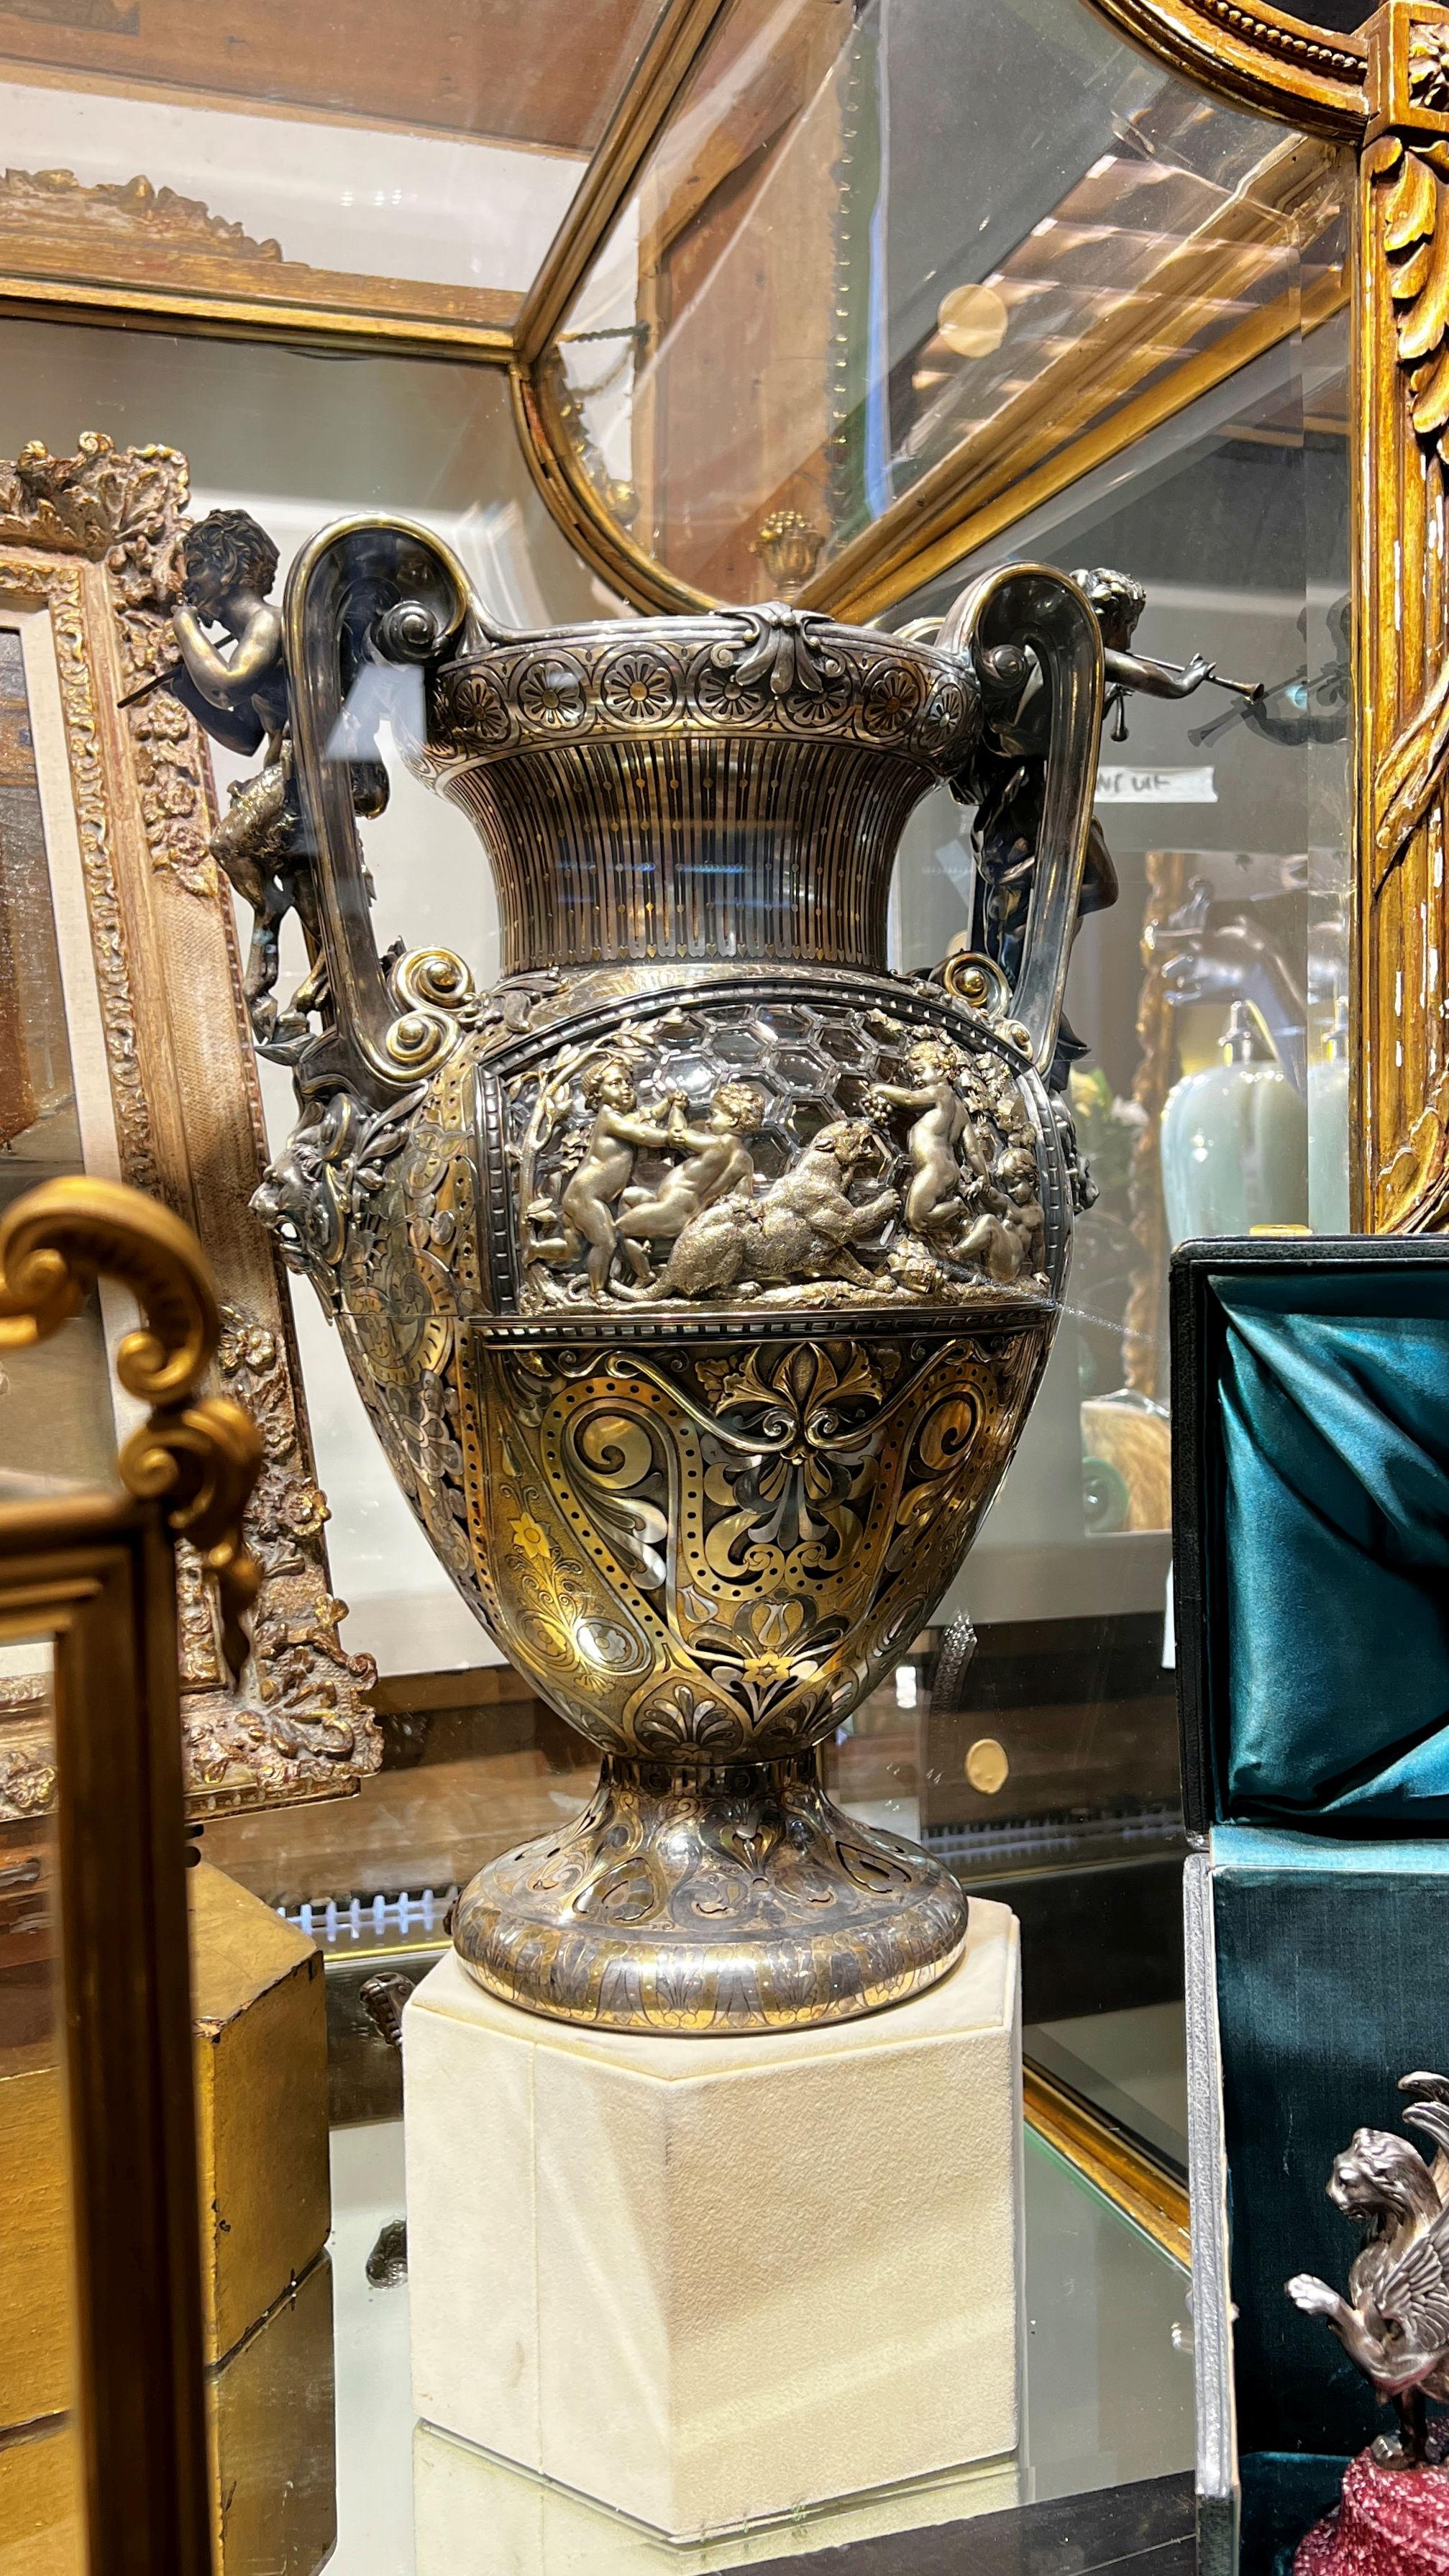 Our important parcel-gilt and patinated silver and glass-mounted vase and matching oil lamp were designed by Paul Legrand (1840-1910) and crafted by the silversmith, Charles Glachant, for Boucheron of Paris, circa 1878-1880. 21 in tall and 16.5 in